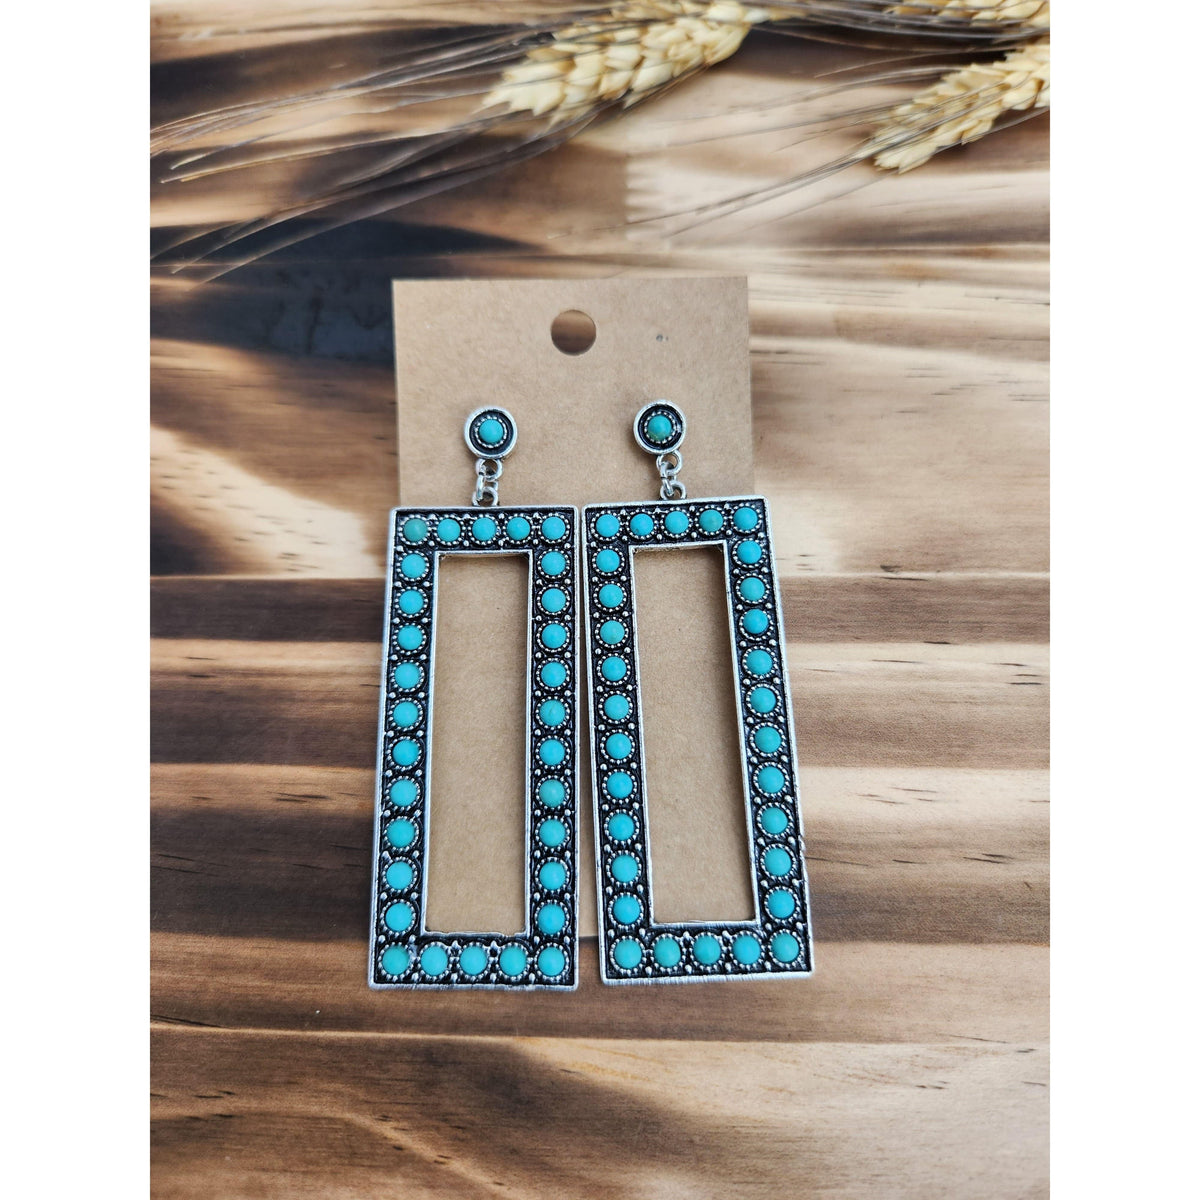 Wild Card Turquoise Earrings Earrings TheFringeCultureCollective